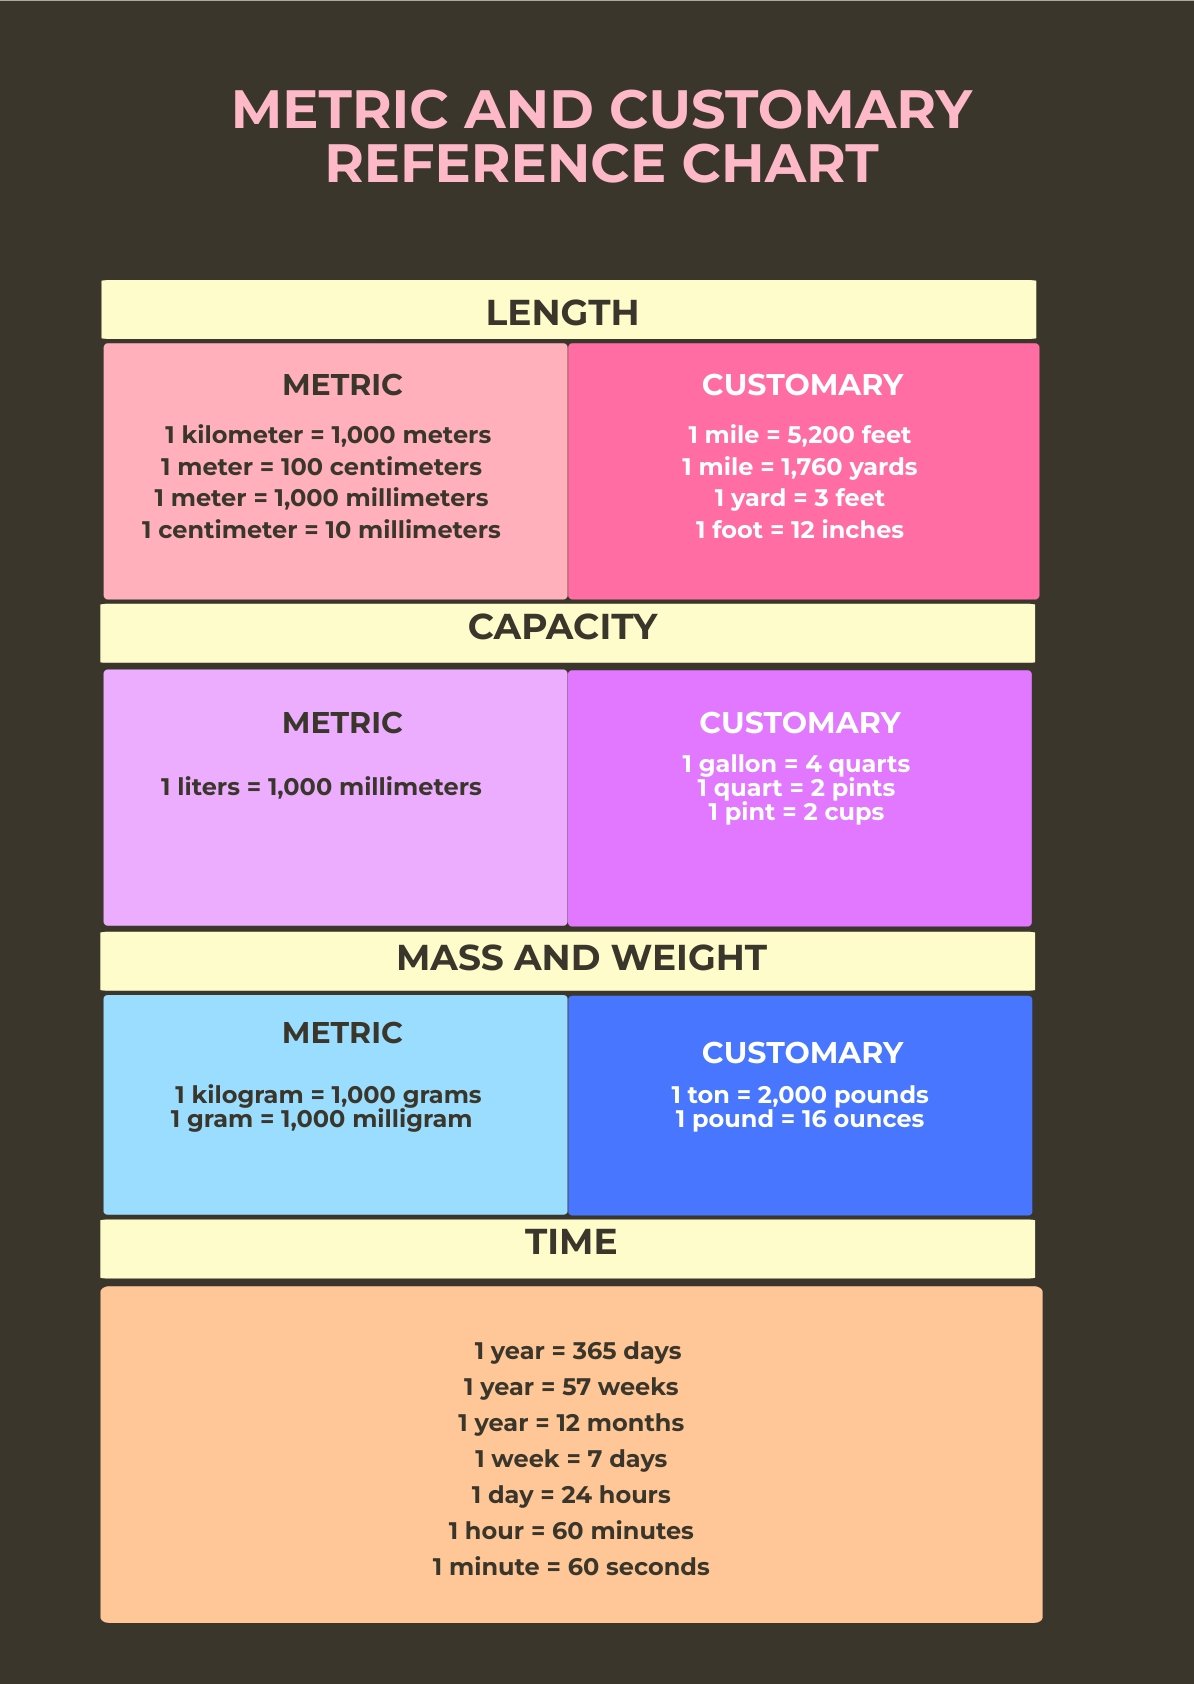 Metric & Customary Conversions Reference Chart